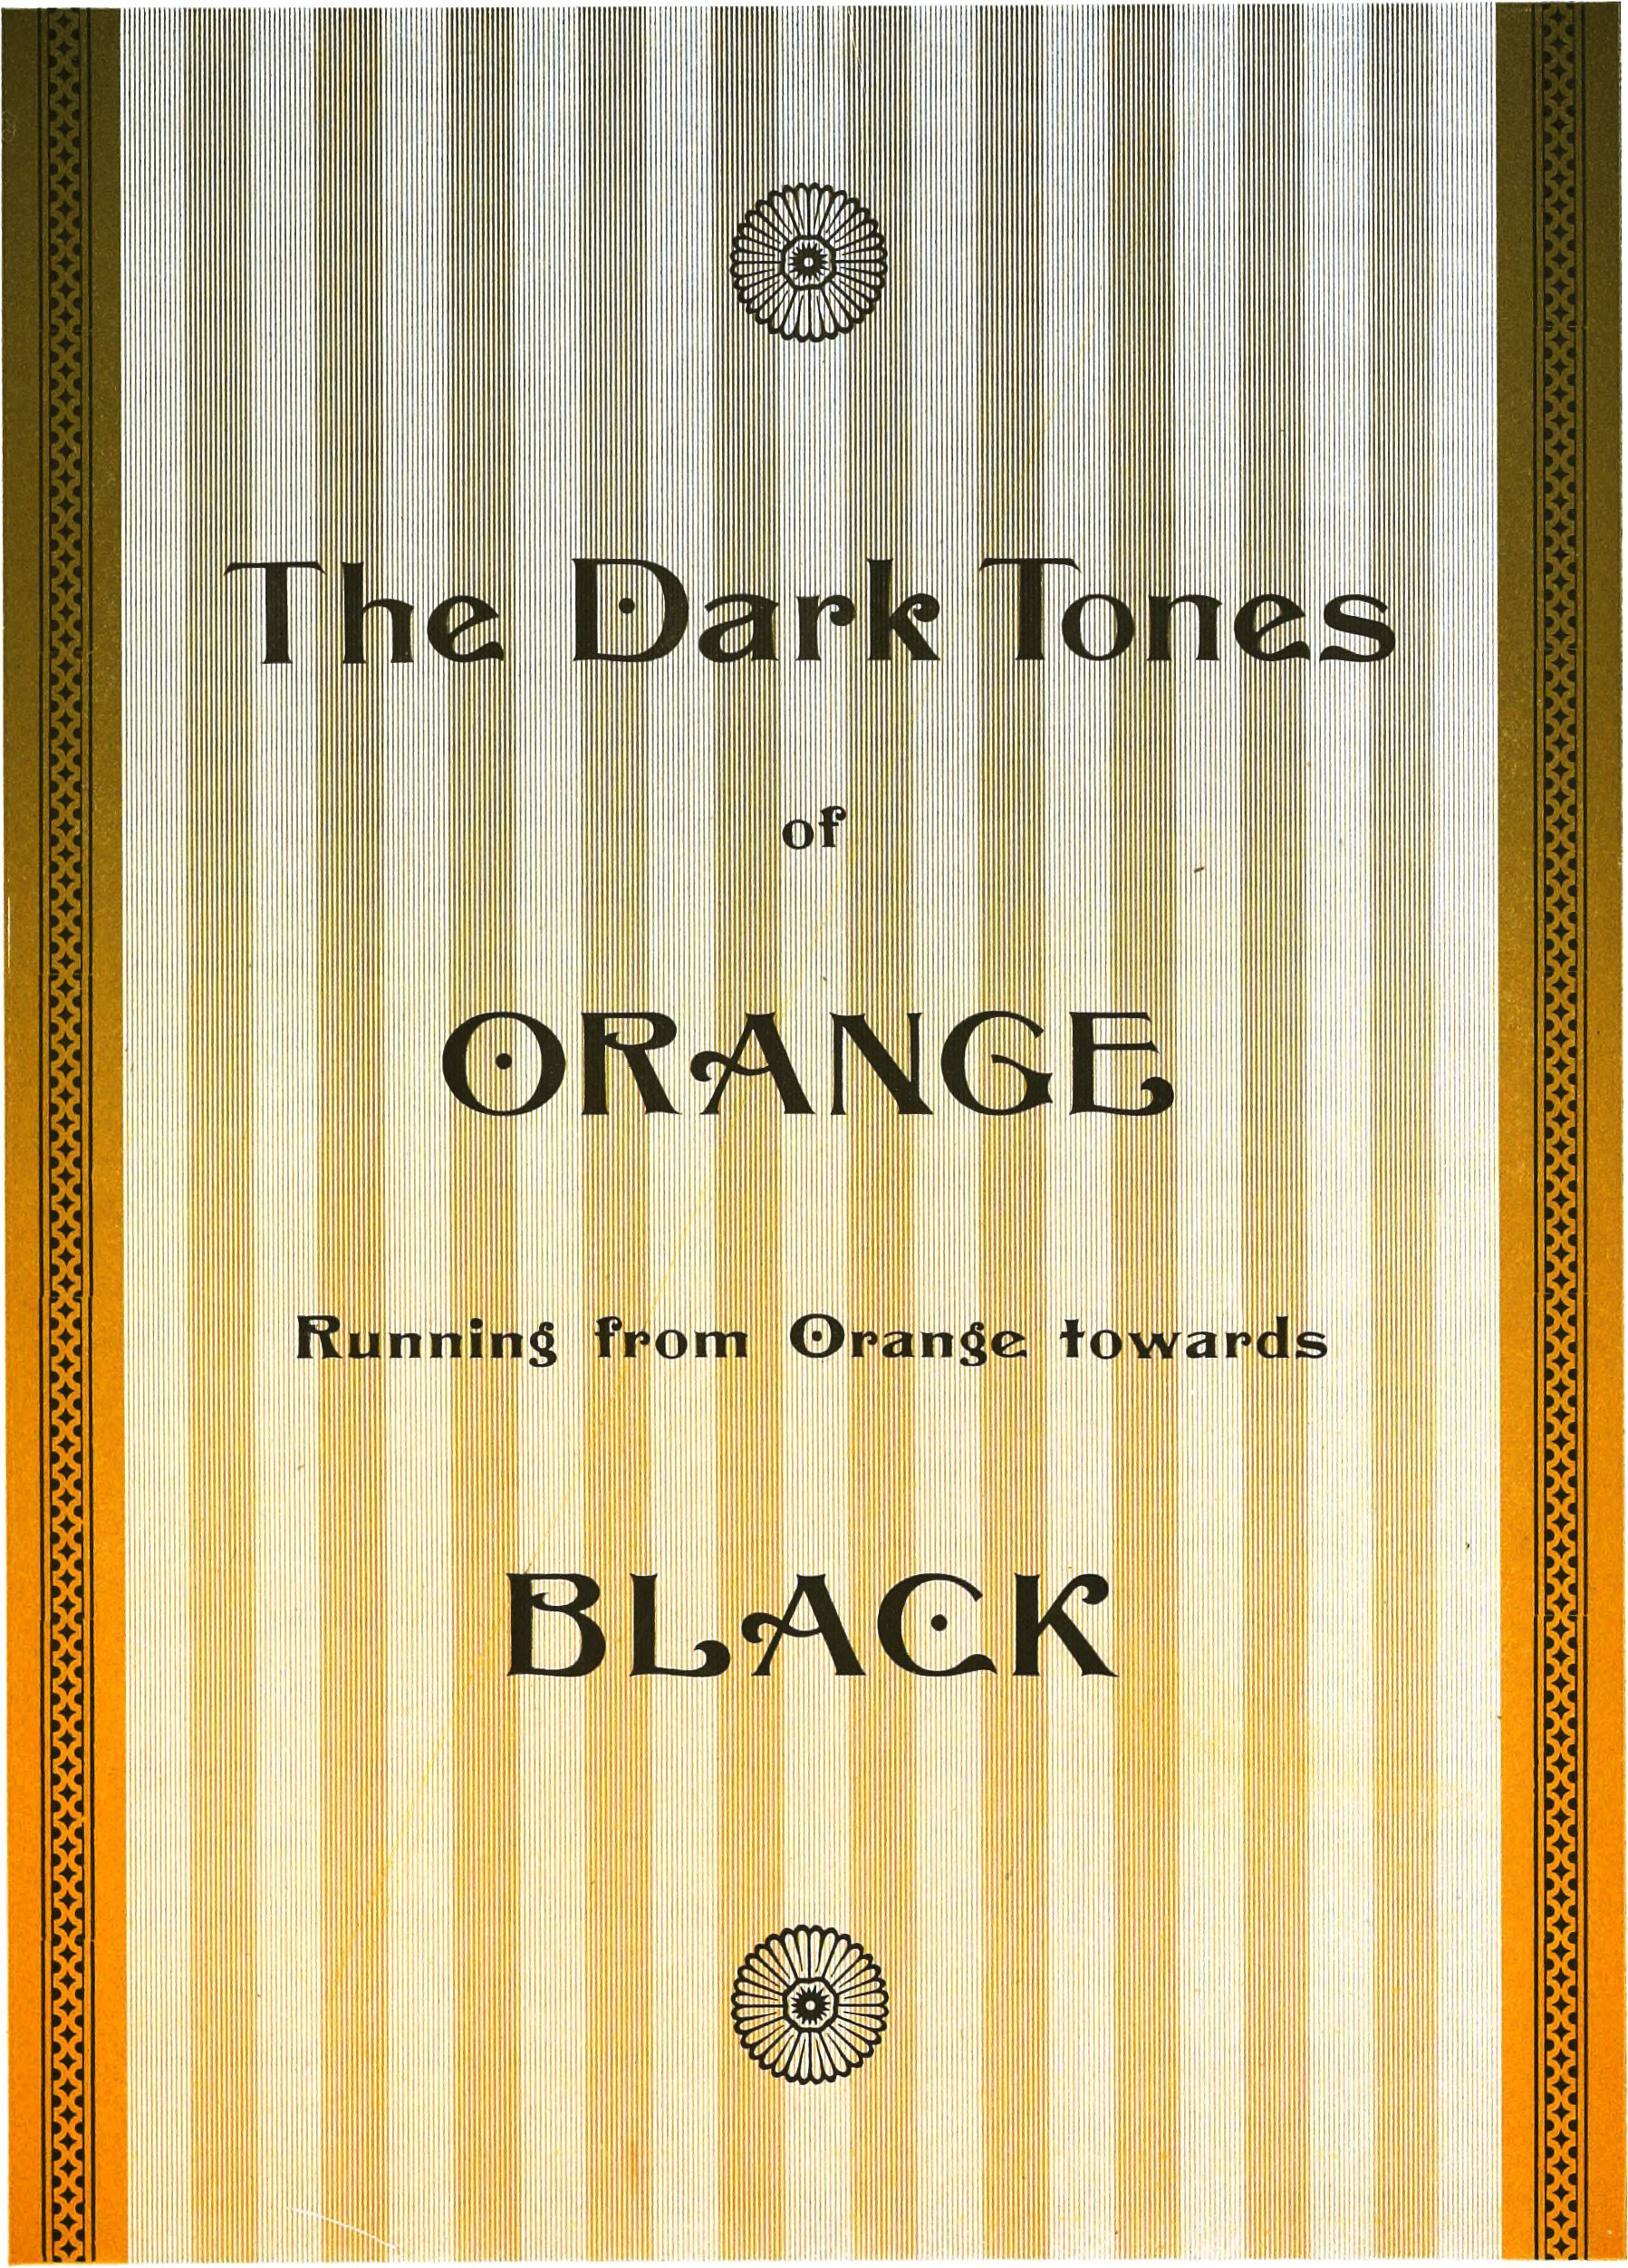 Full page print with stripes and borders of orange shades and black, saying 'The dark tones of orange running from orange towards black'